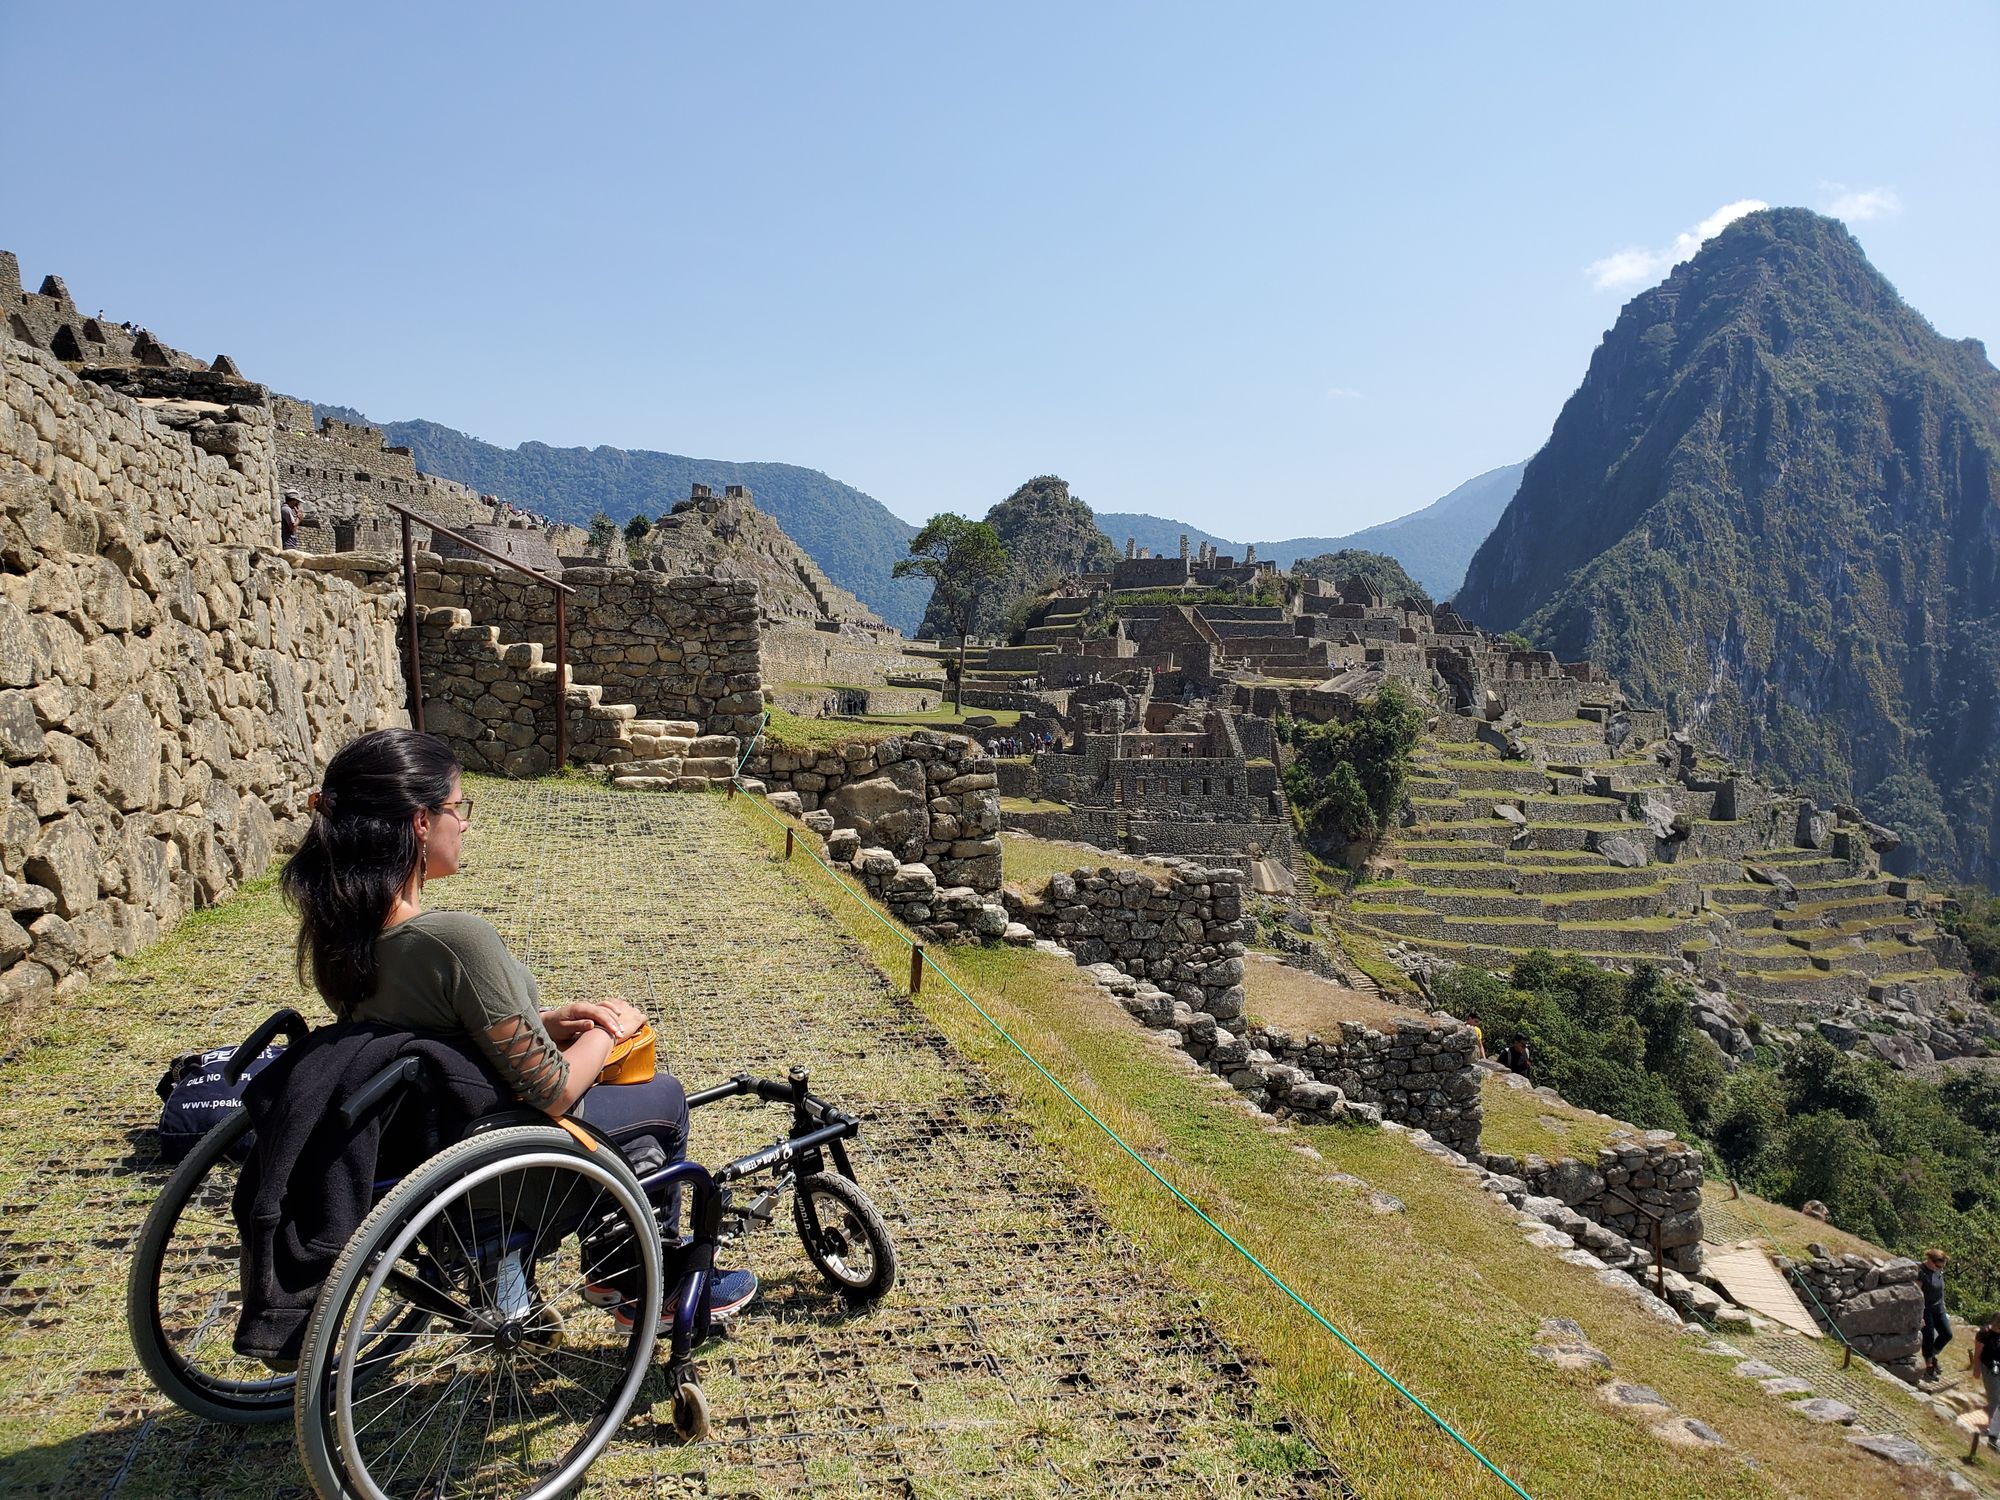 Wheelchair users and those with mobility issues can trek to Machu Picchu in Peru.